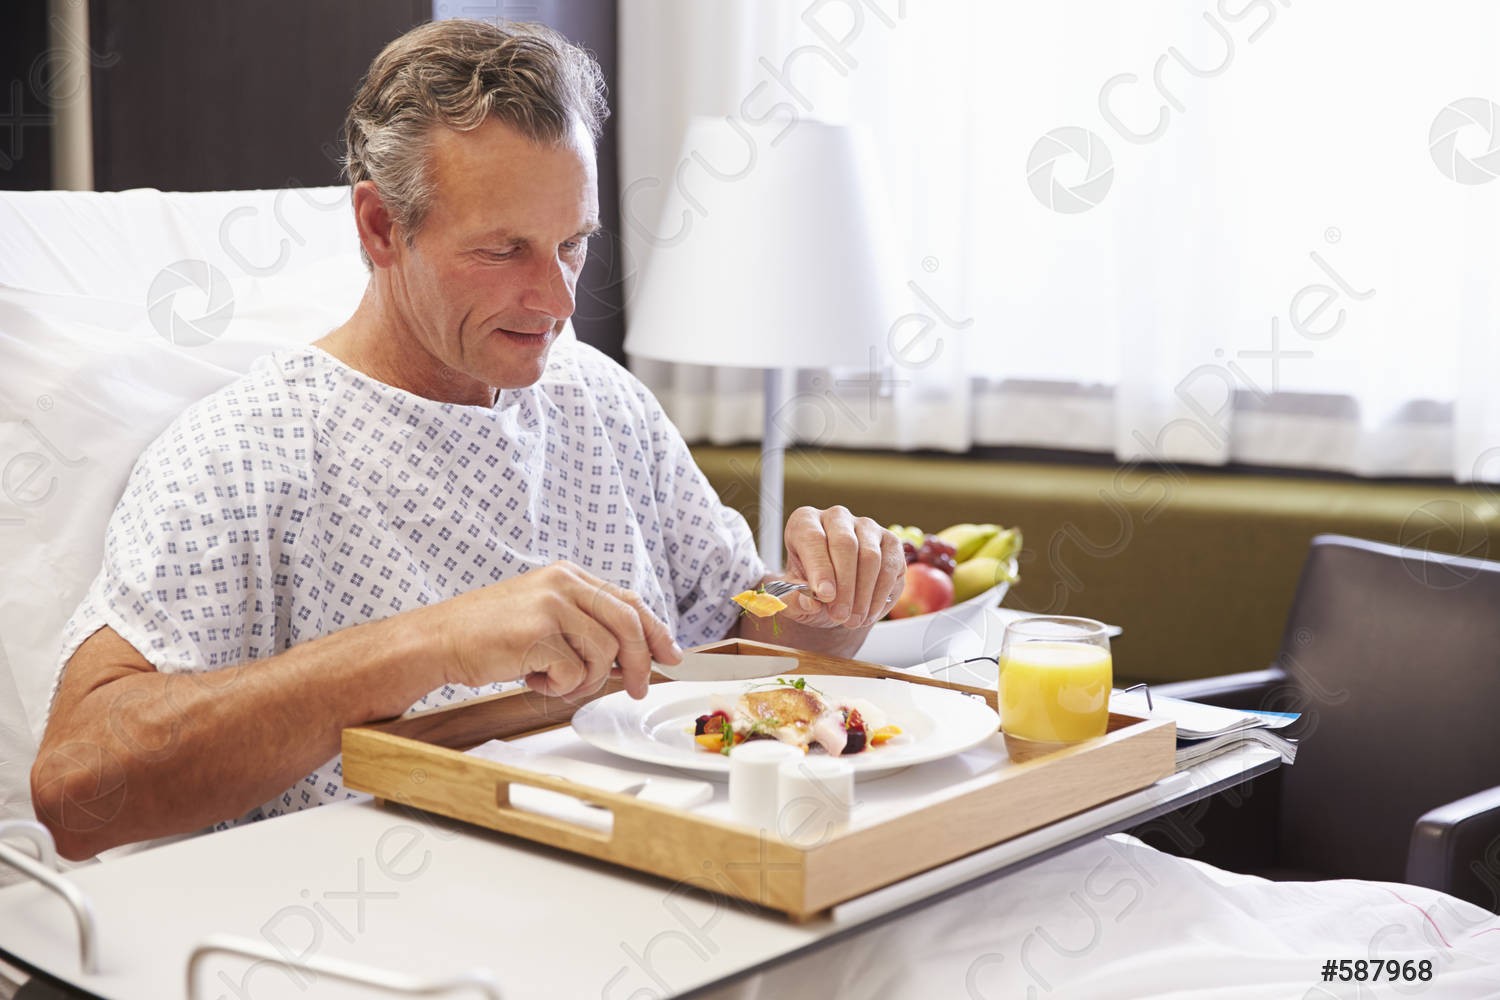 male-patient-hospital-bed-eating-587968.jpg